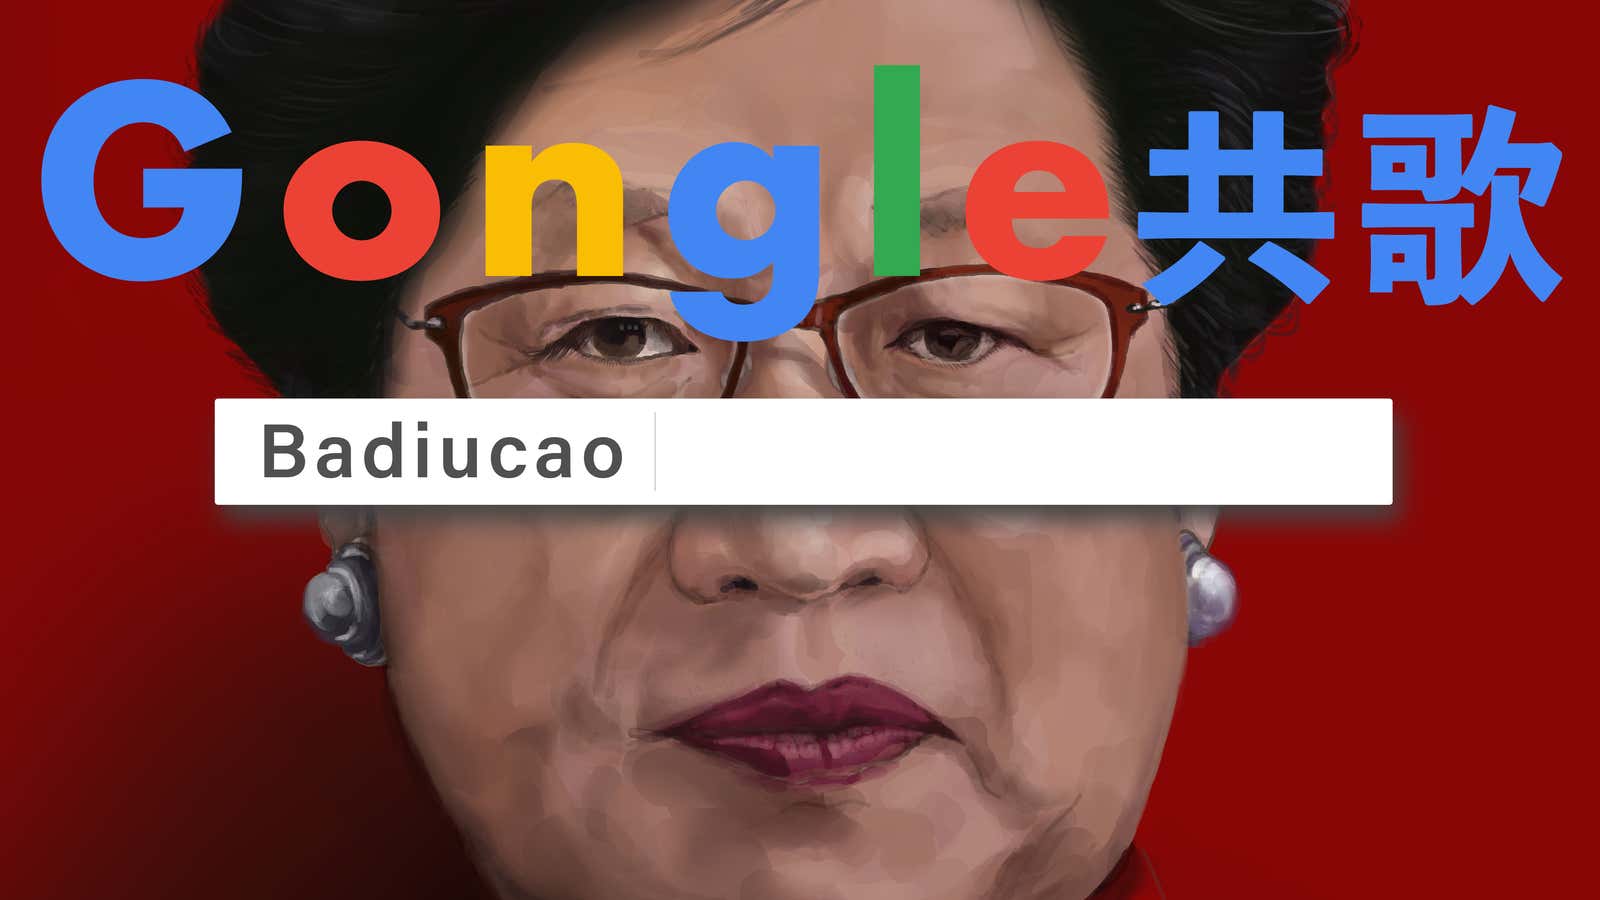 Gongle, a Hong Kong exhibition of the work of political cartoonist Badiucao, was canceled.